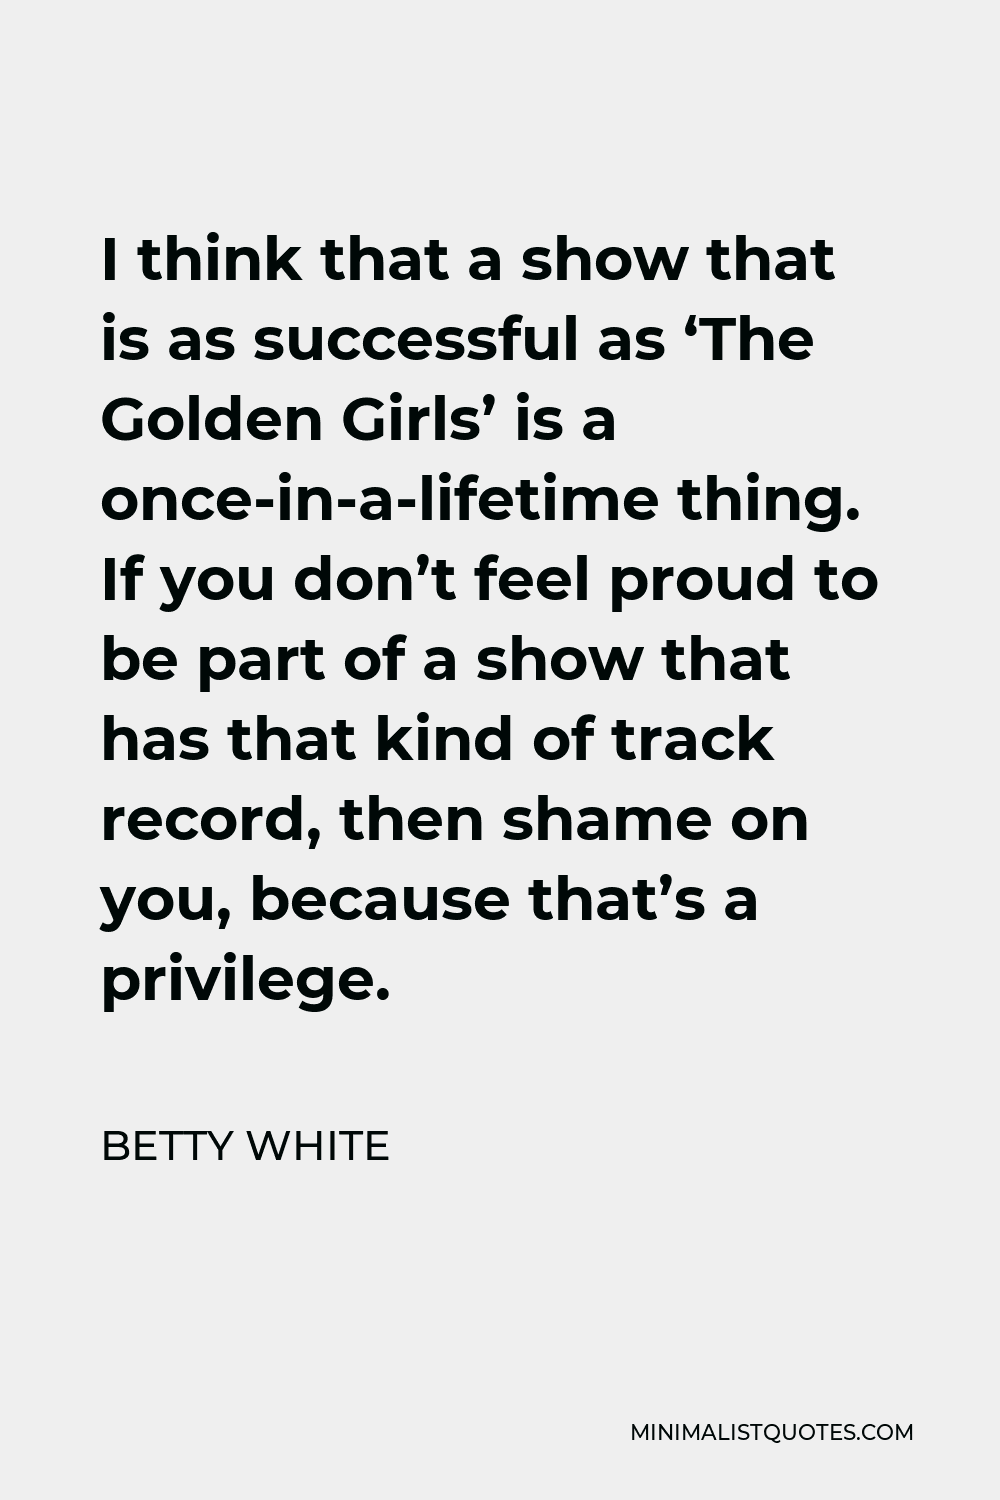 Betty White Quote - I think that a show that is as successful as ‘The Golden Girls’ is a once-in-a-lifetime thing. If you don’t feel proud to be part of a show that has that kind of track record, then shame on you, because that’s a privilege.